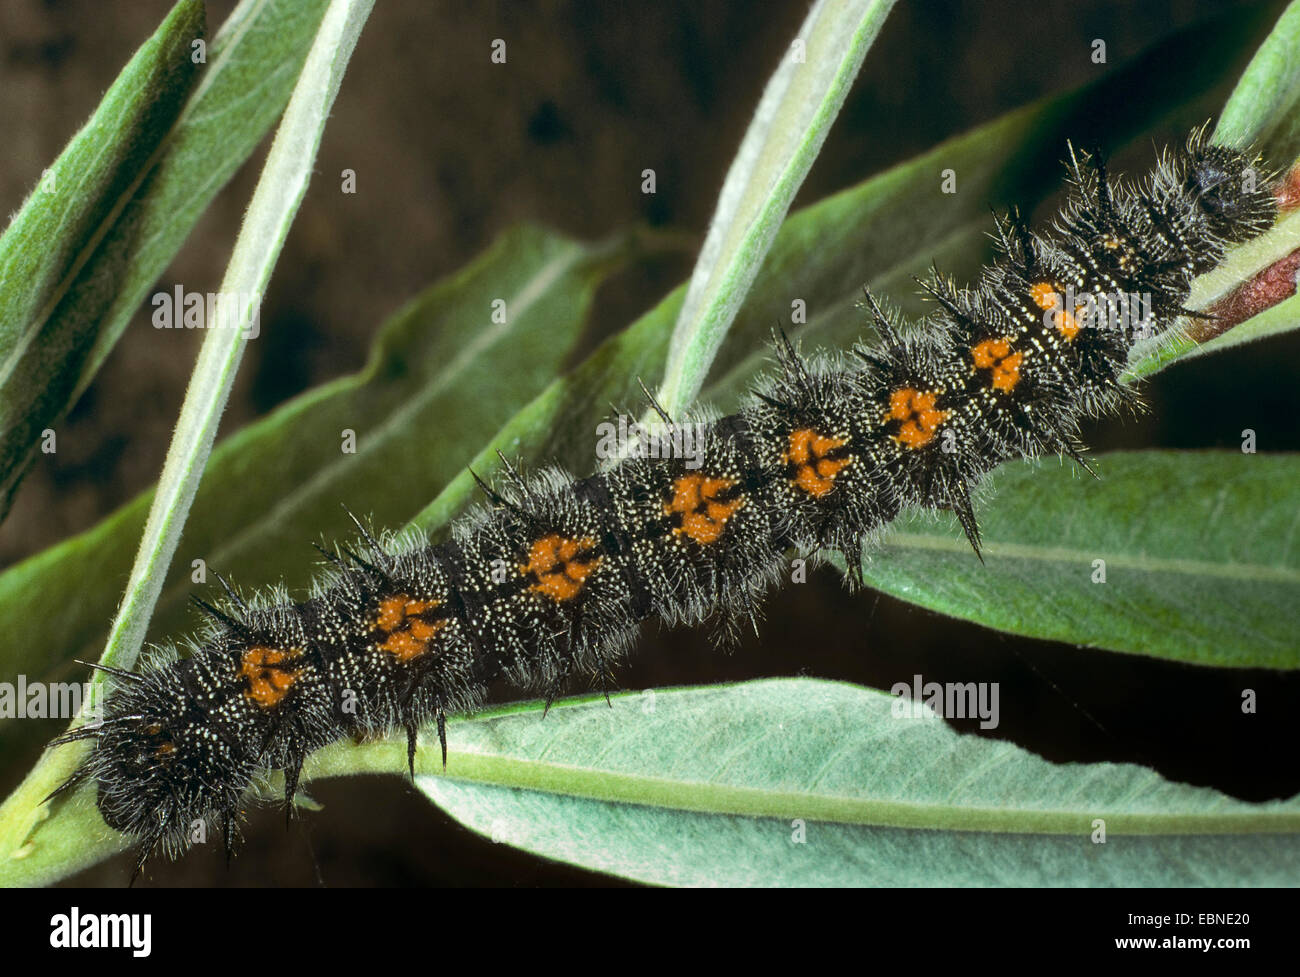 (Nymphalis antiopa Camberwell beauty), Caterpillar, Allemagne Banque D'Images